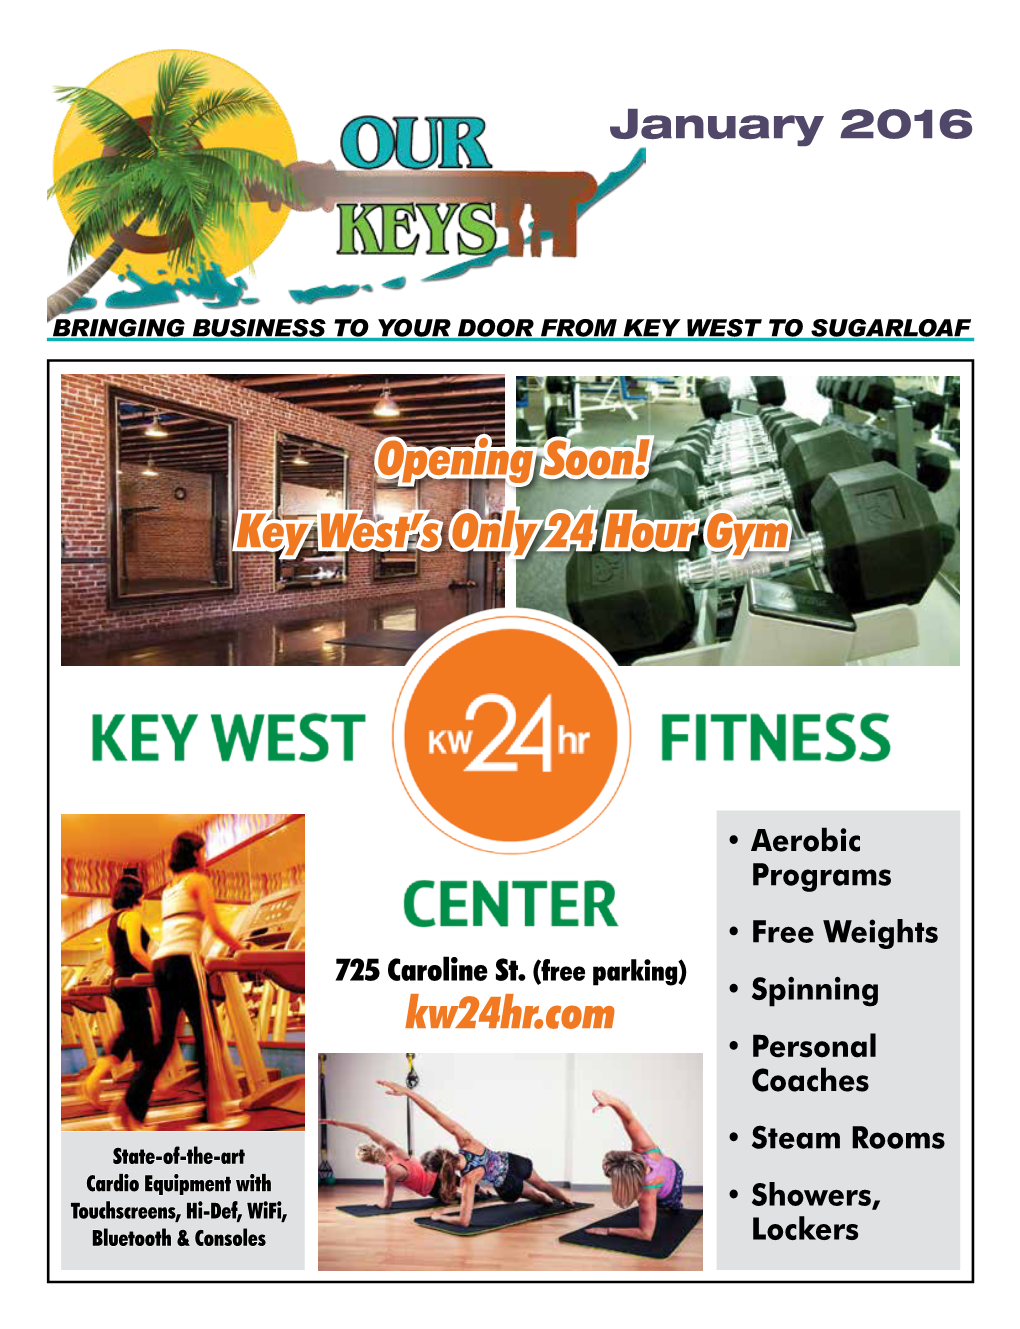 Opening Soon! Key West's Only 24 Hour